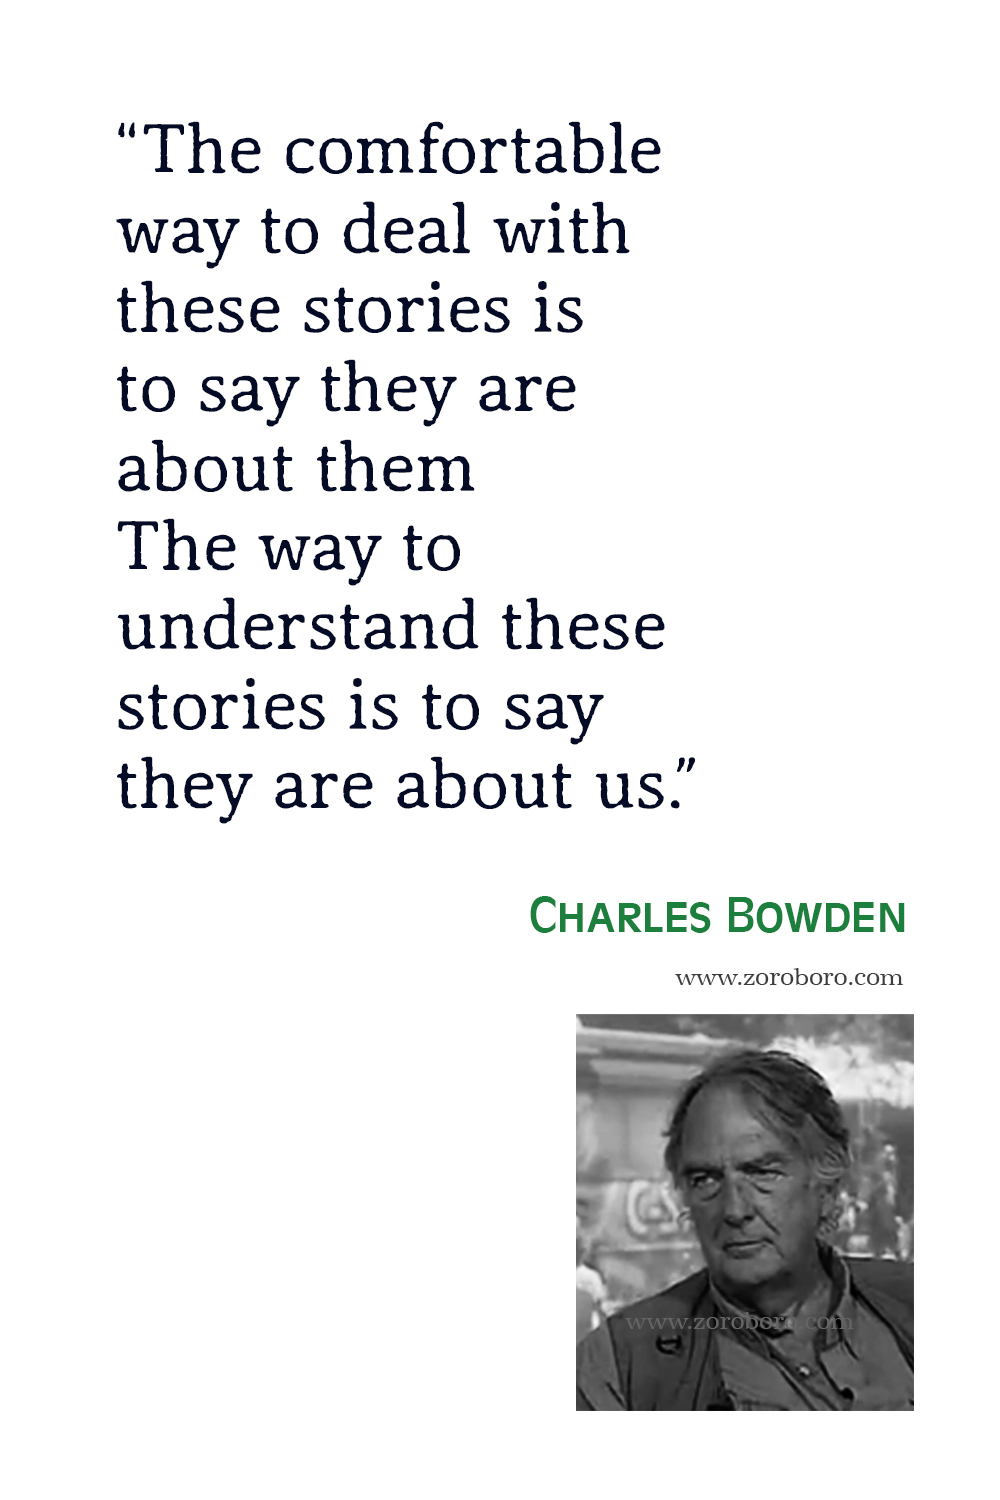 Charles Bowden Quotes, Charles Bowden Books Quotes, Charles Bowden Quotes, Charles Bowden.